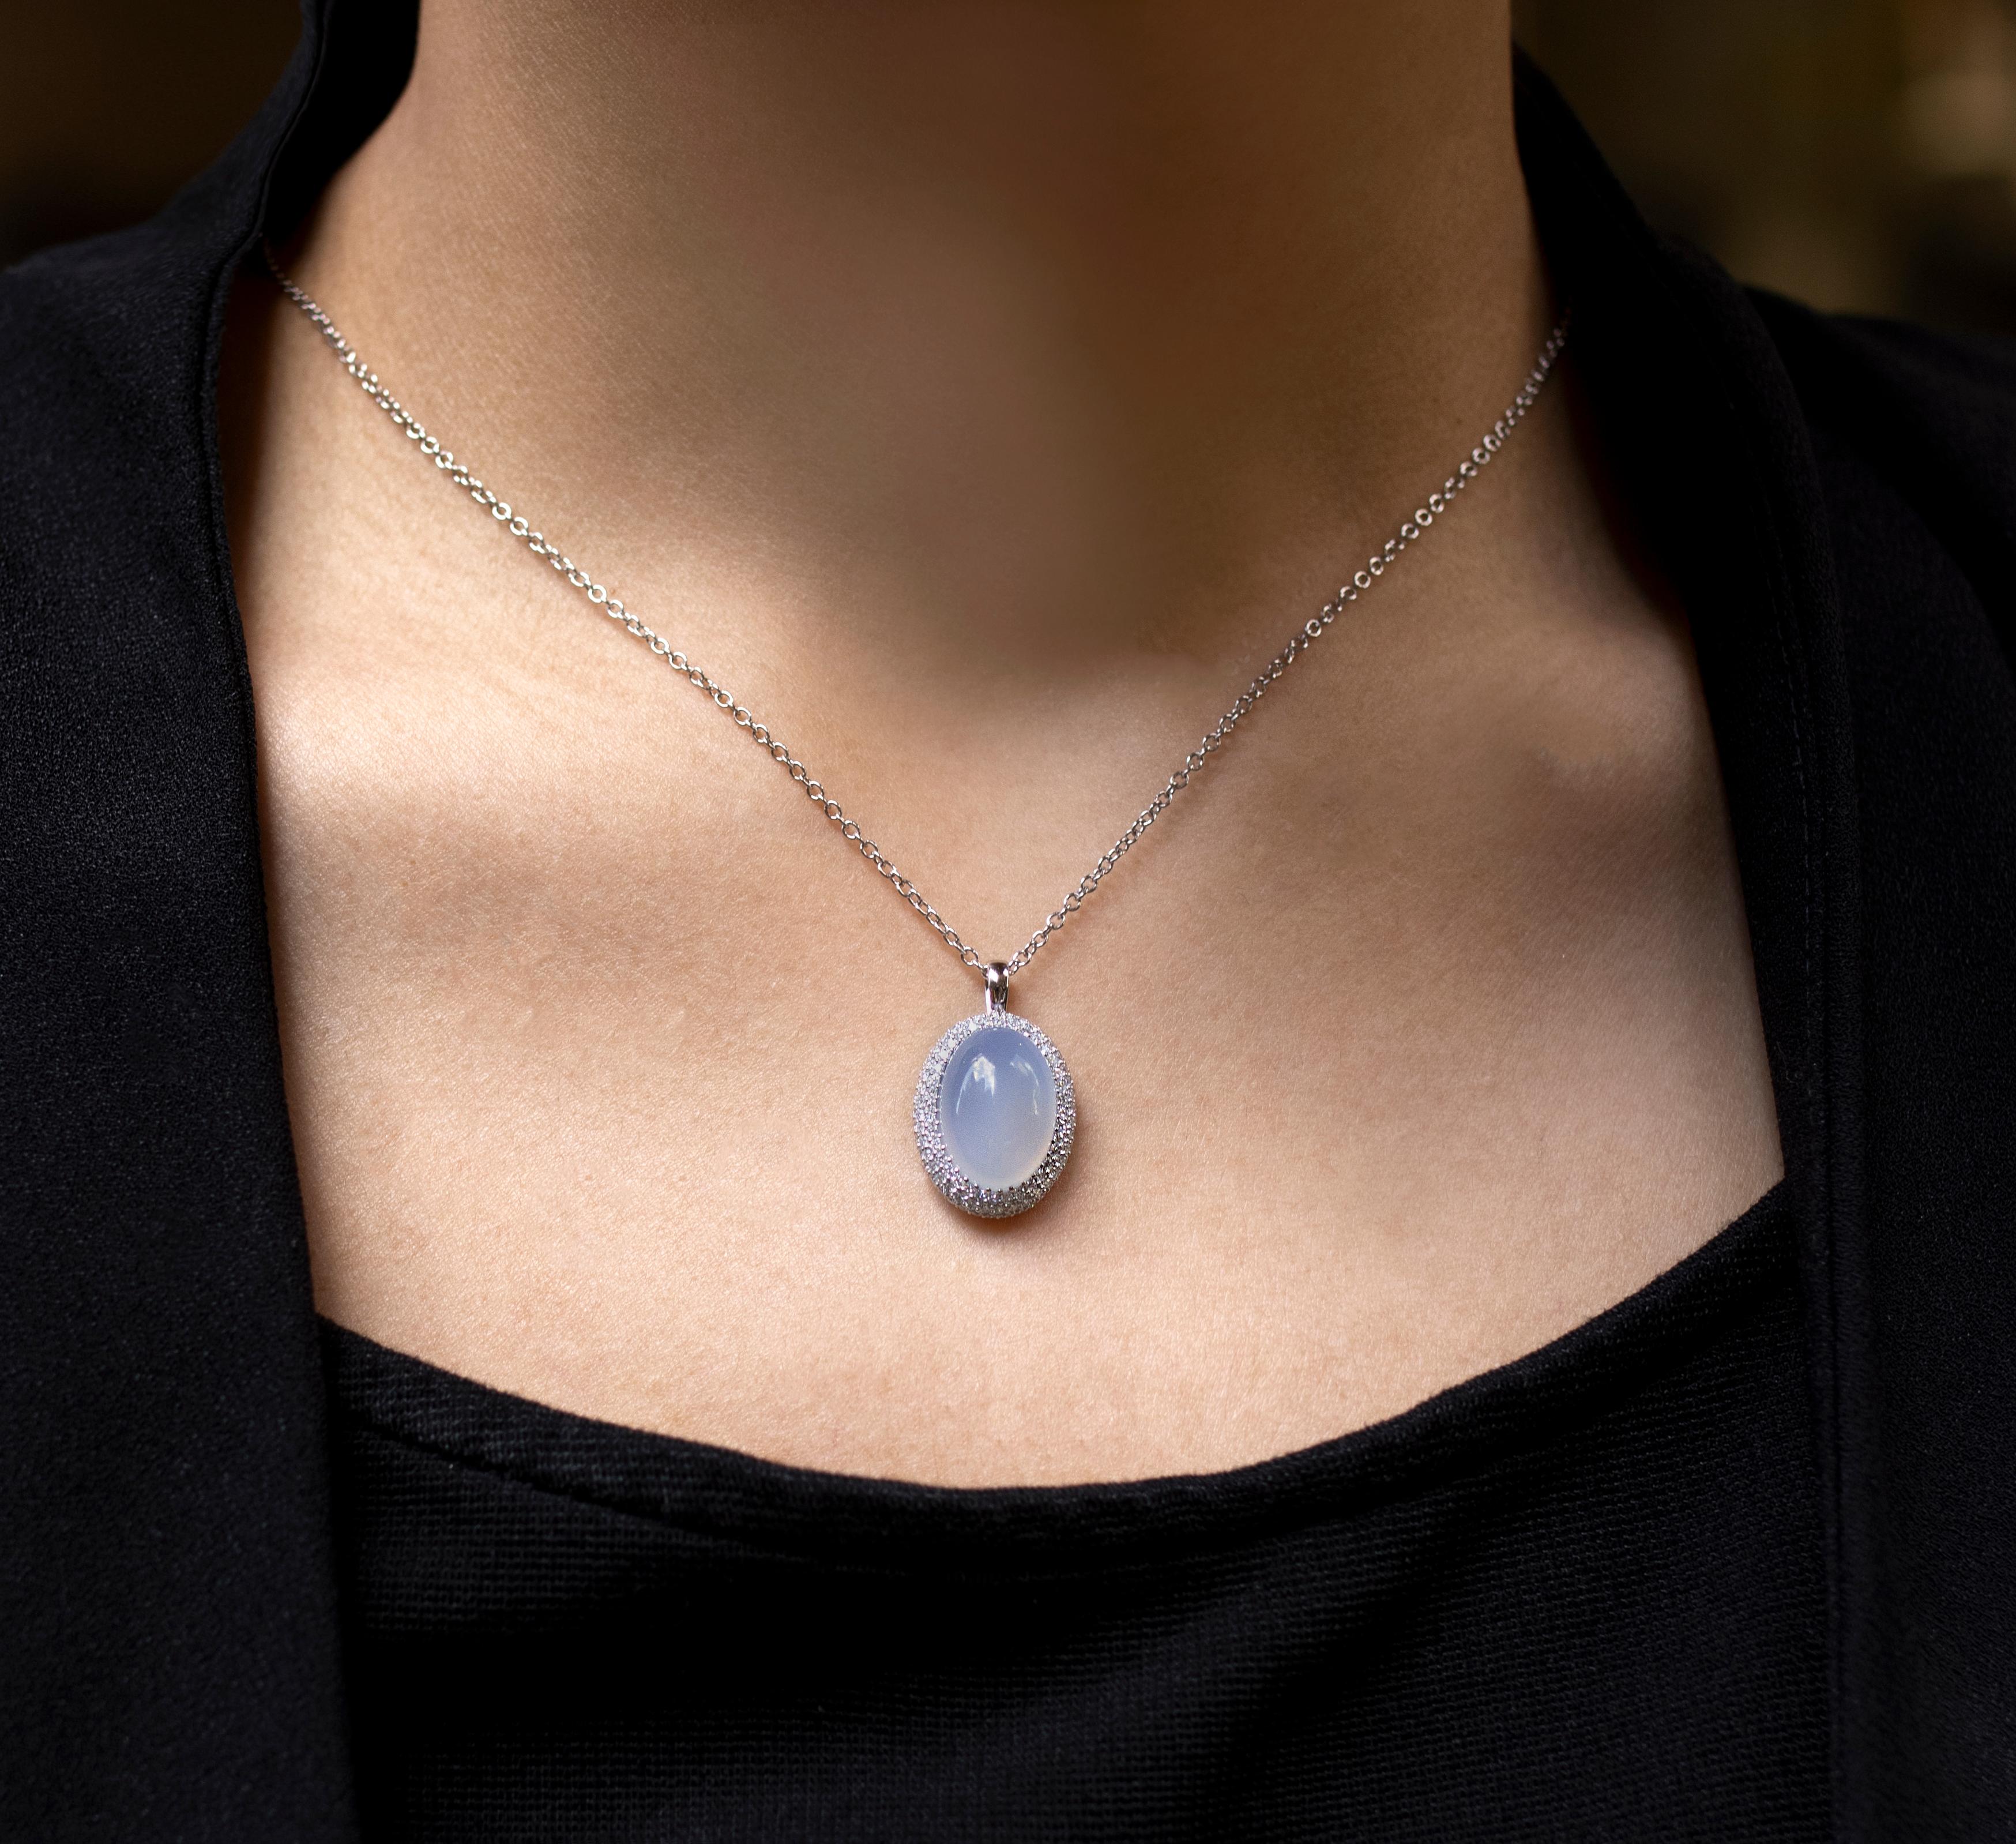 7 Carat Oval Cut Lavender Chalcedony Pendant Necklace in White Gold In New Condition For Sale In New York, NY